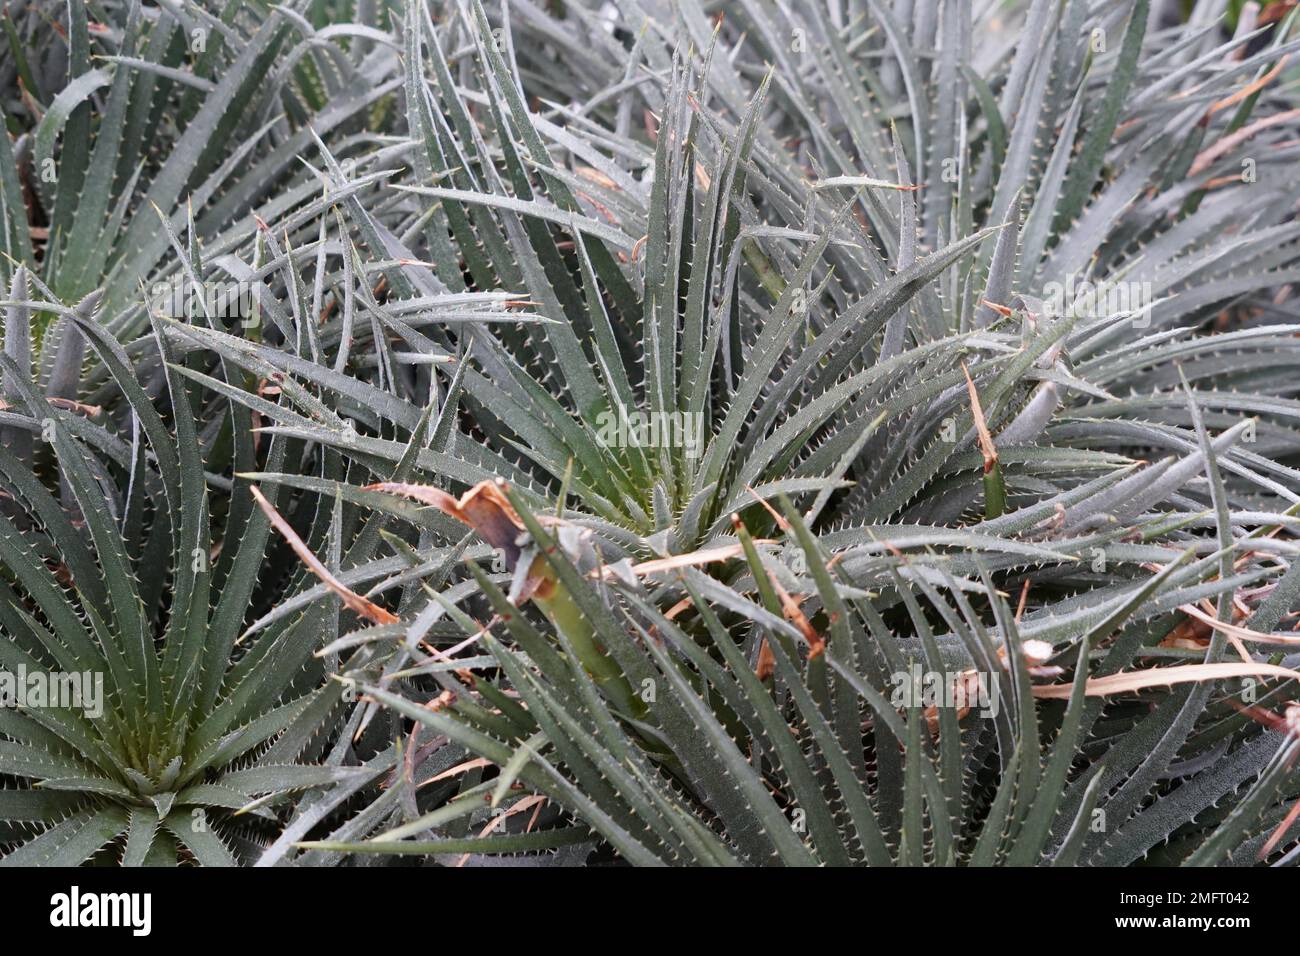 Colony of aloe plants growing densely together, they are called Aloe spinosissima in Latin. Stock Photo